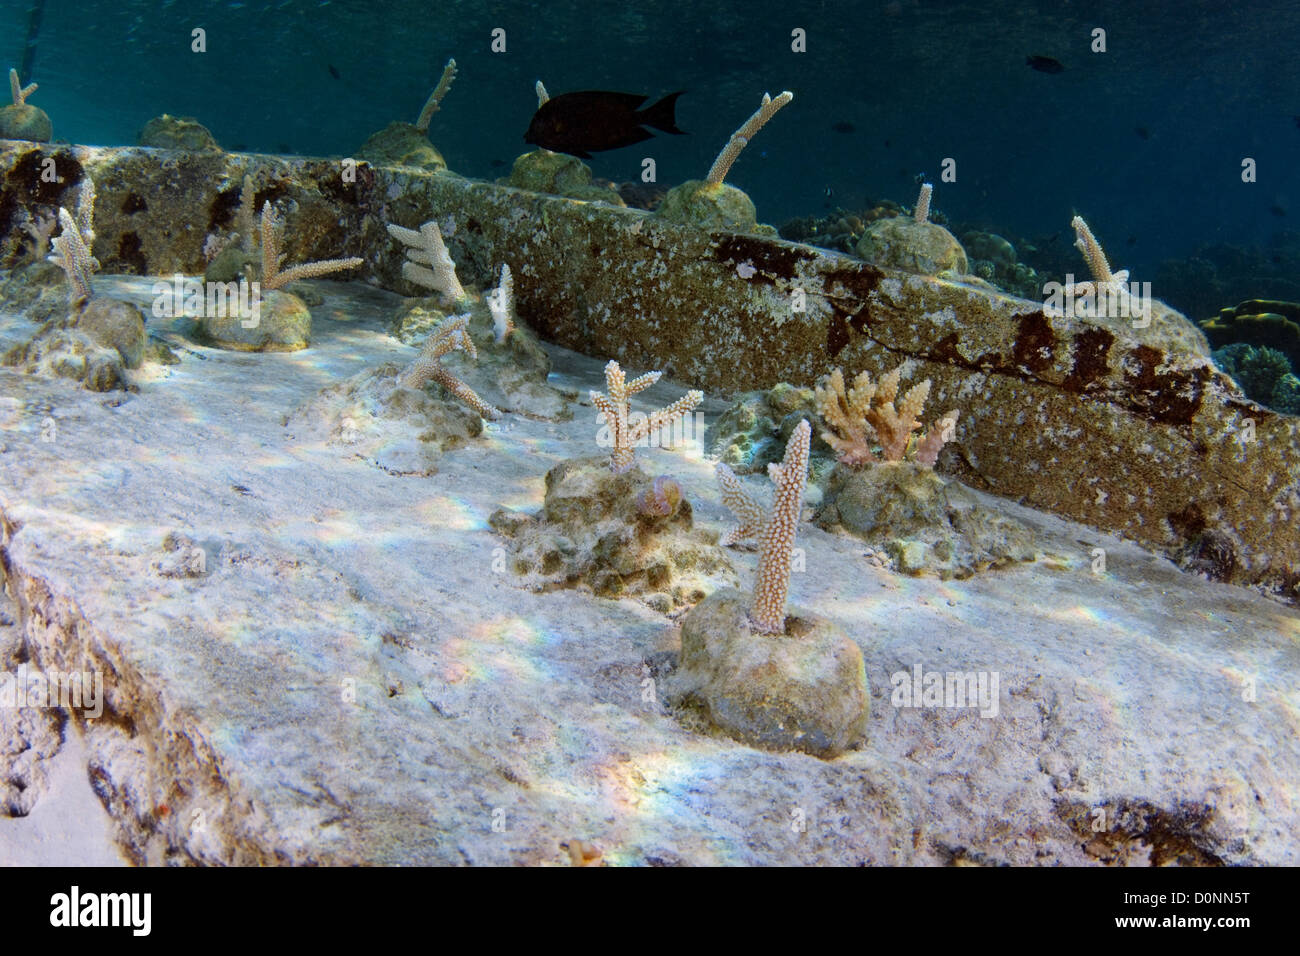 Hard Coral fragments cemented in a manmade reef, The Maldives. Stock Photo